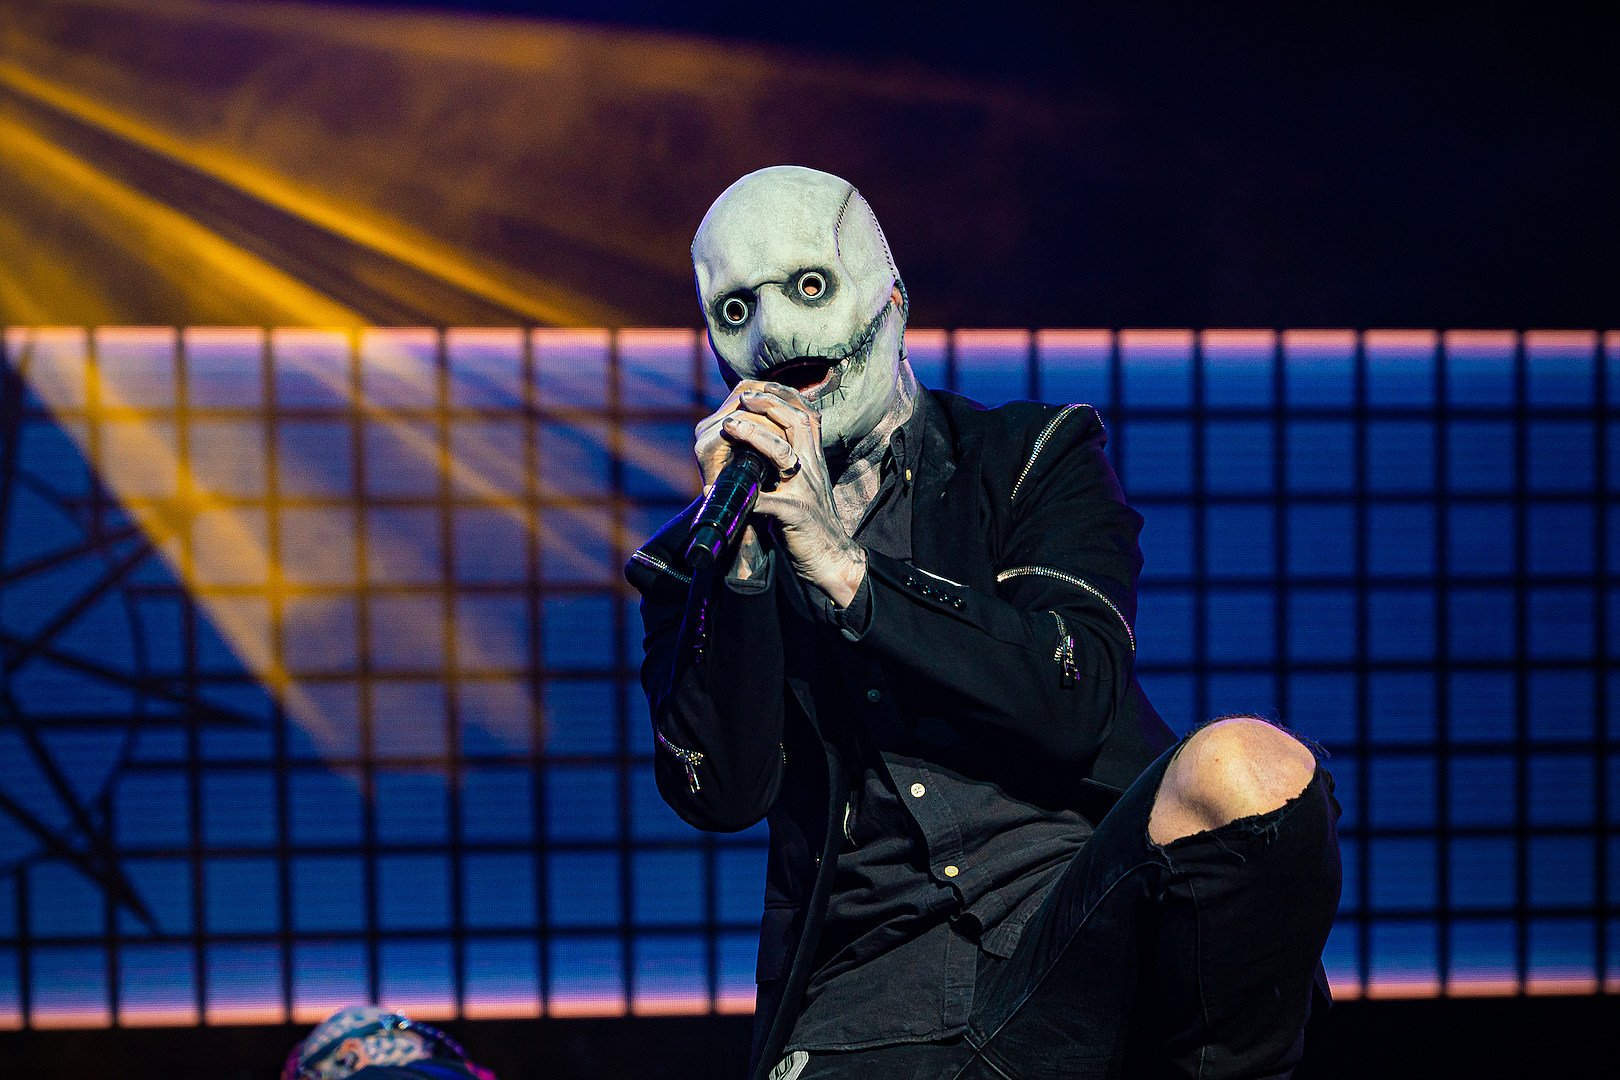 Corey Taylor Reveals the Job He Wanted Before Becoming a Musician